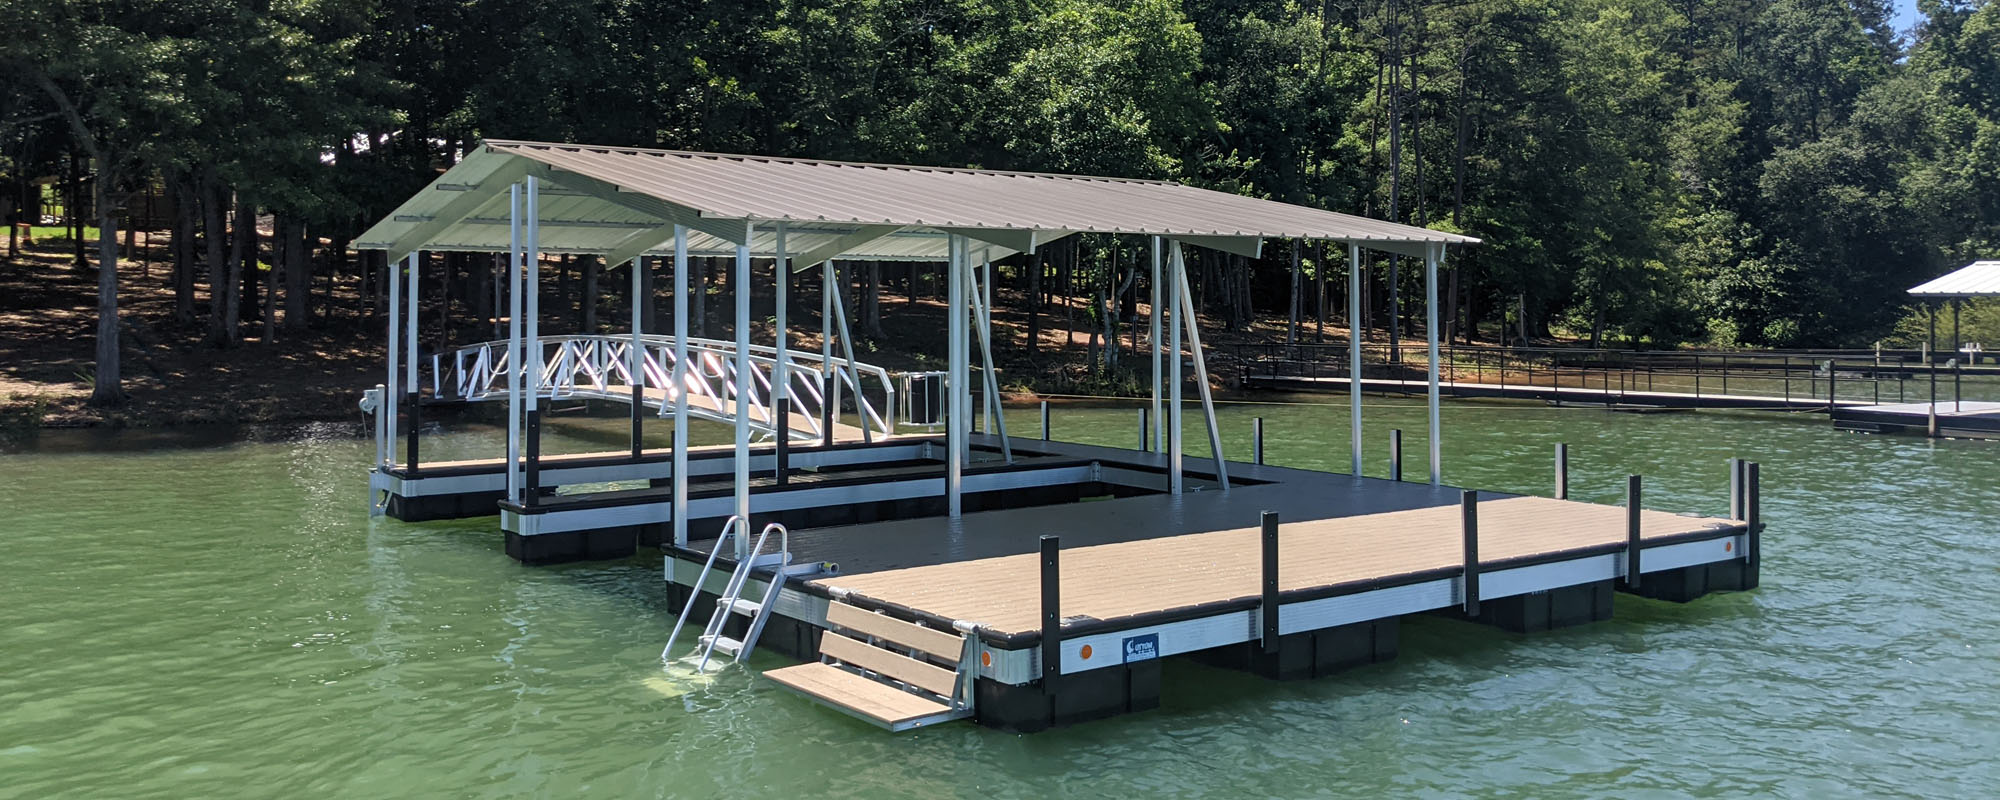 Custom Dock Systems builds quality Boat Docks, Boat Lifts